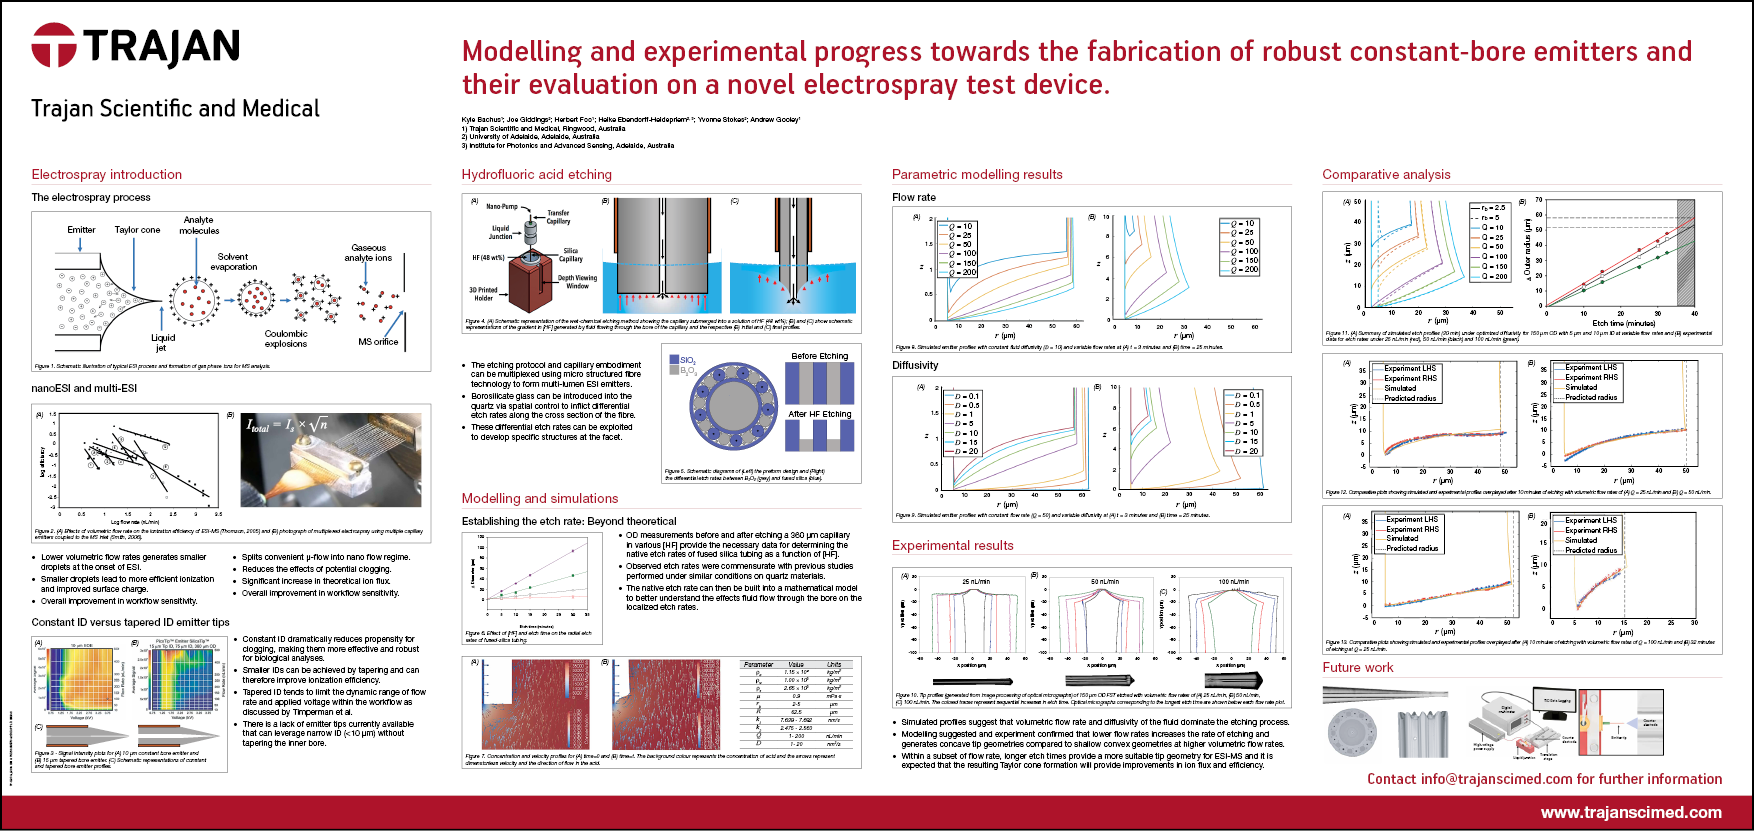 Technical Poster - Modelling and experimental progress towards the fabrication of robust constant-bore emitters and their evaluation on a novel electrospray test device